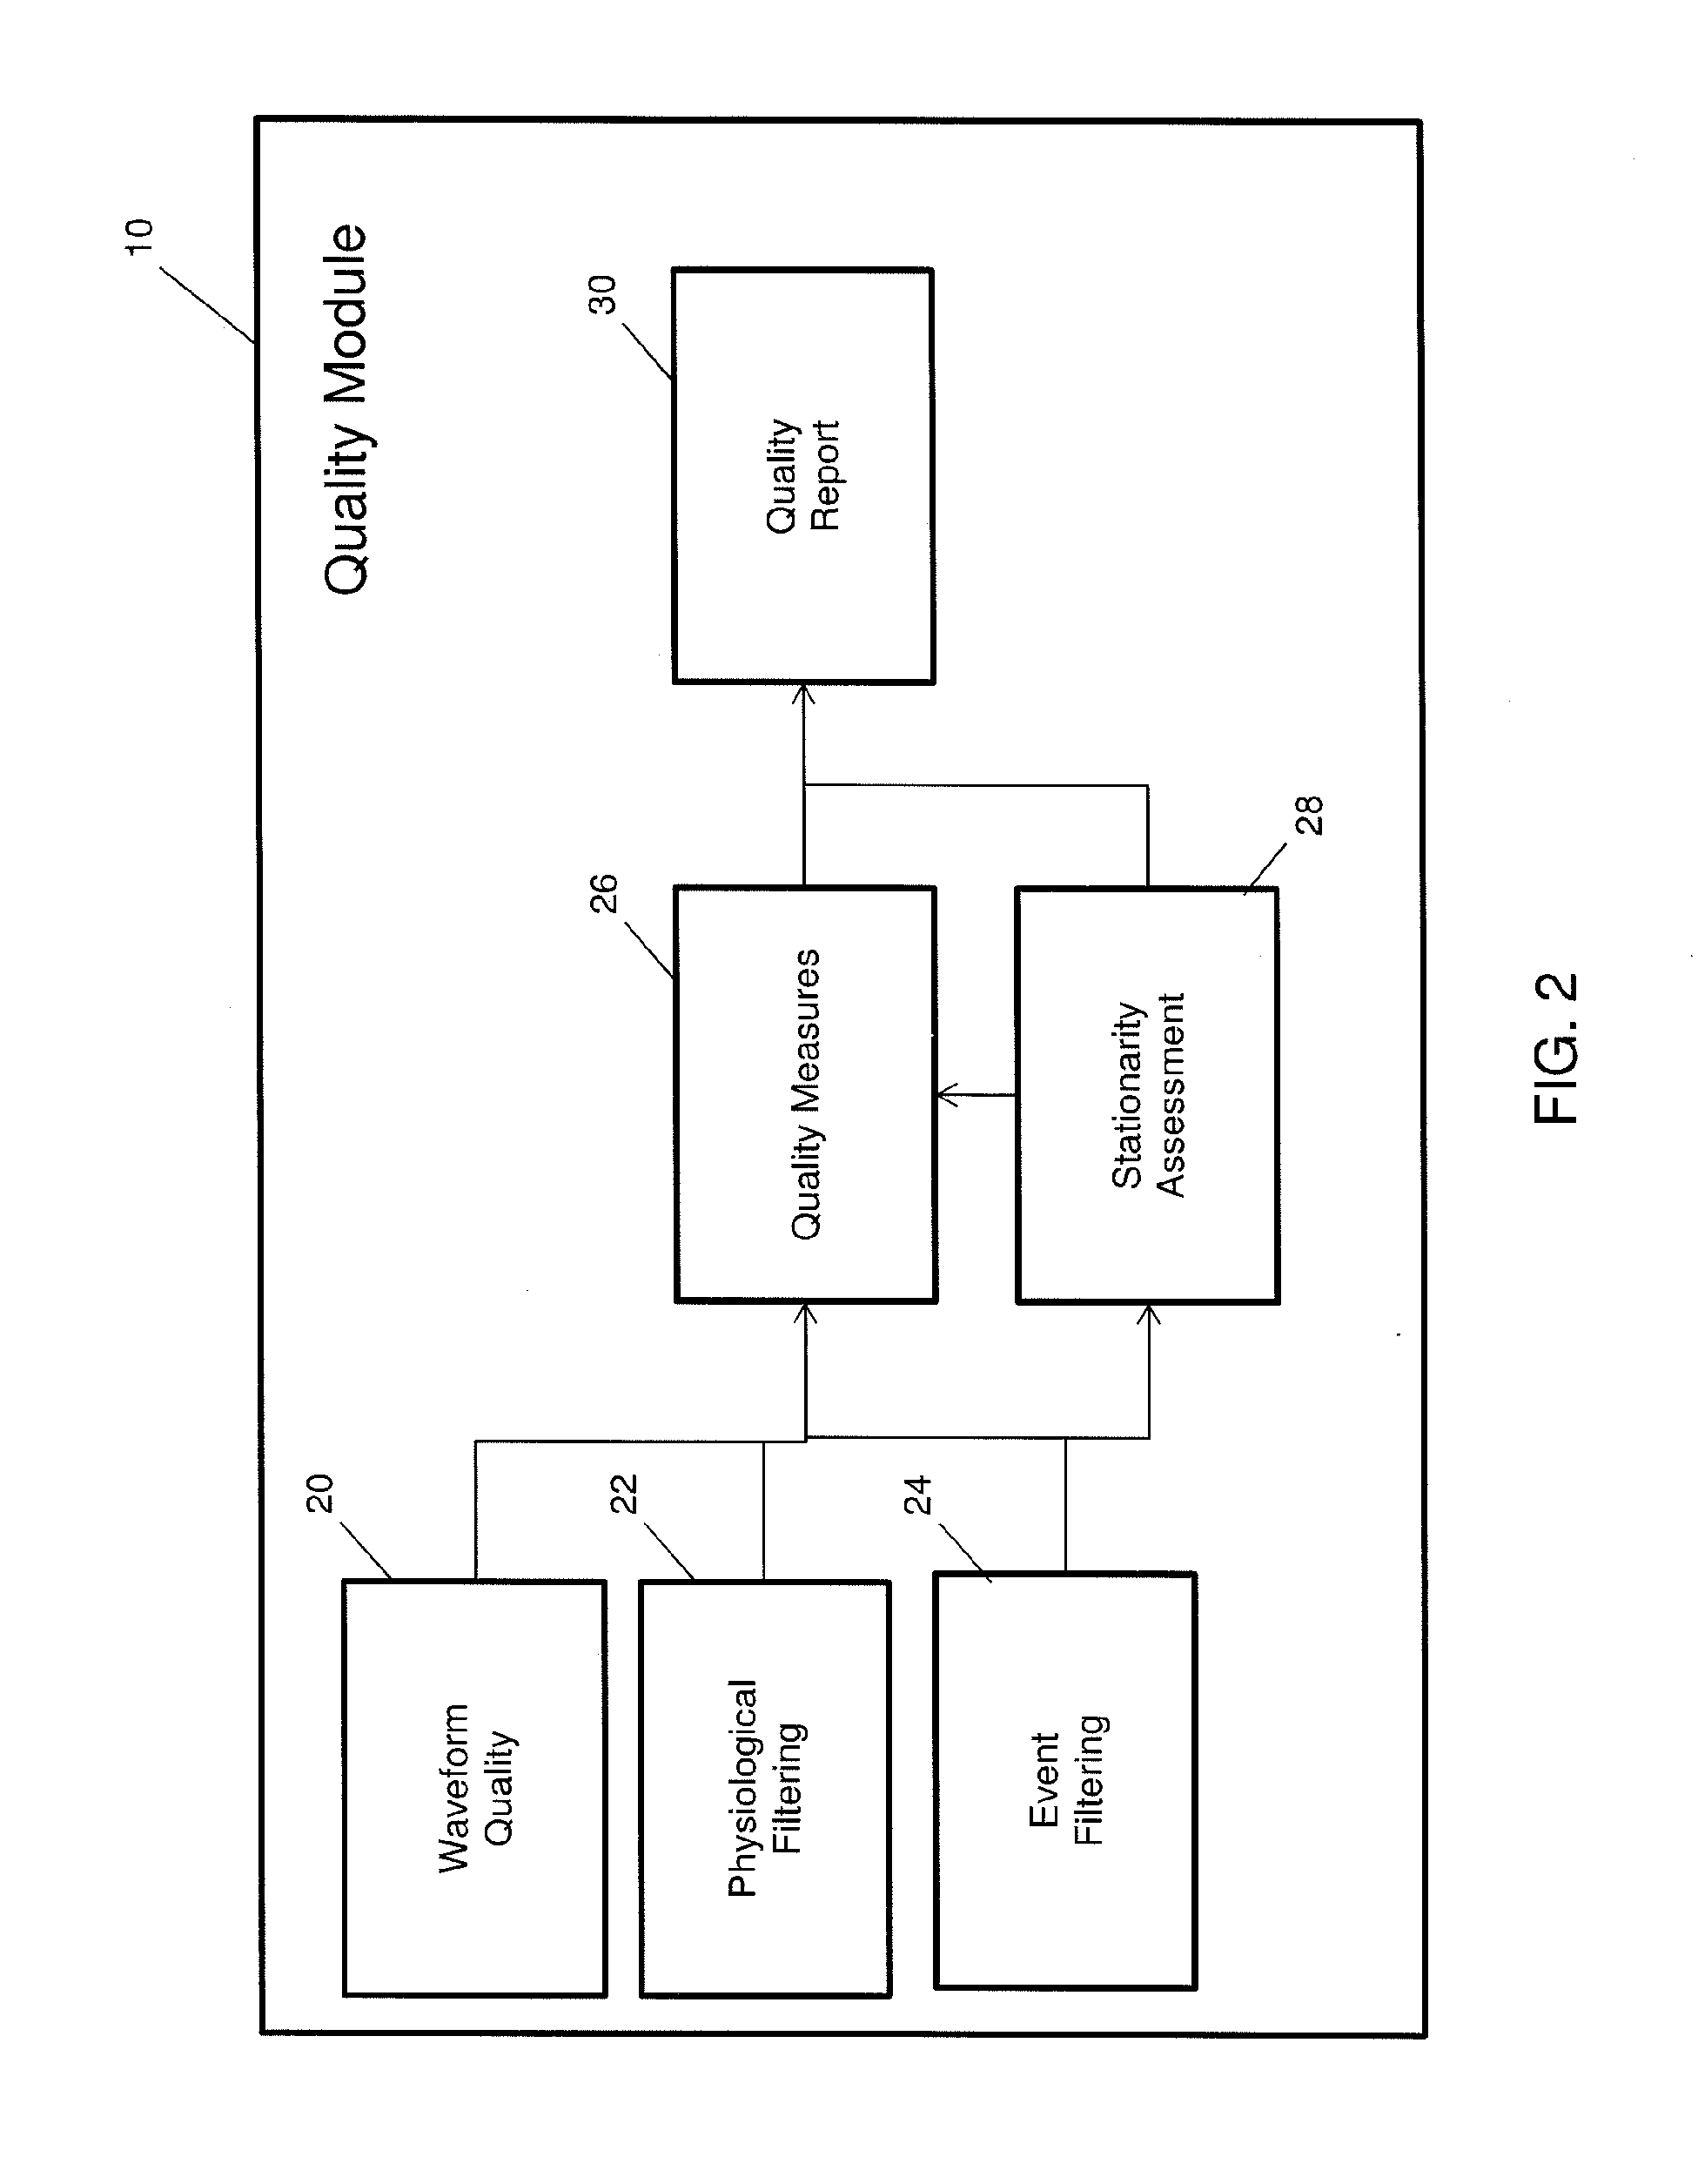 Method for Multi-Scale Quality Assessment for Variability Analysis